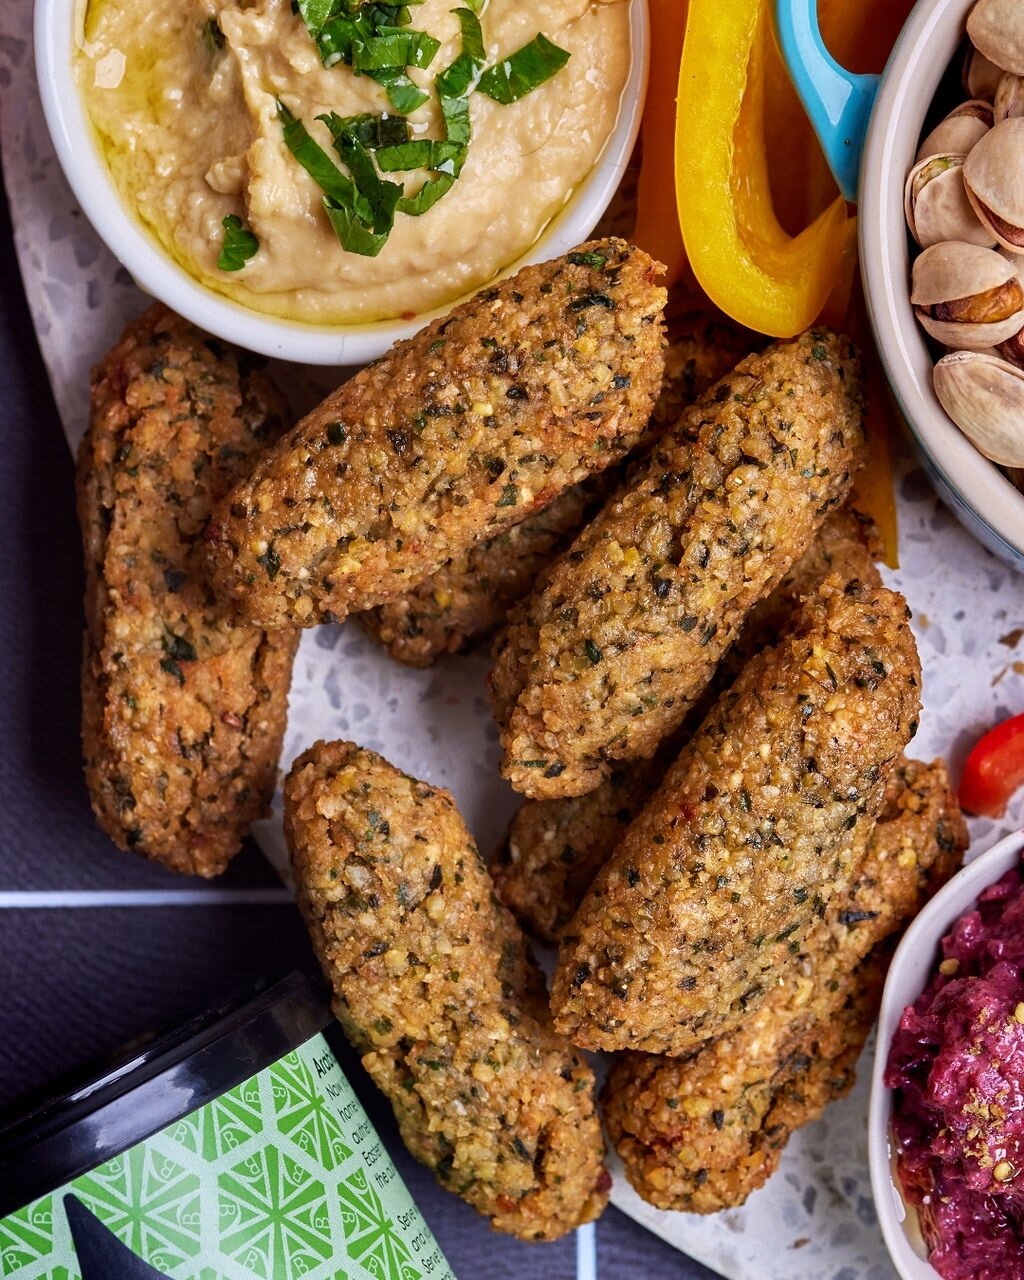 Golden crunchy felafel - YES PLEASE!⁠
⁠
Want Falafel that you can whip up at home in minutes?⁠
⁠
Arabian Bites Felafel Mixes are available in 4 flavours options:⁠
⁠
💚 Original ⁠
&hearts;️ Beetroot ⁠
🧡Pumpkin ⁠
🤍 Onion &amp; Garlic Free⁠
⁠
Order vi